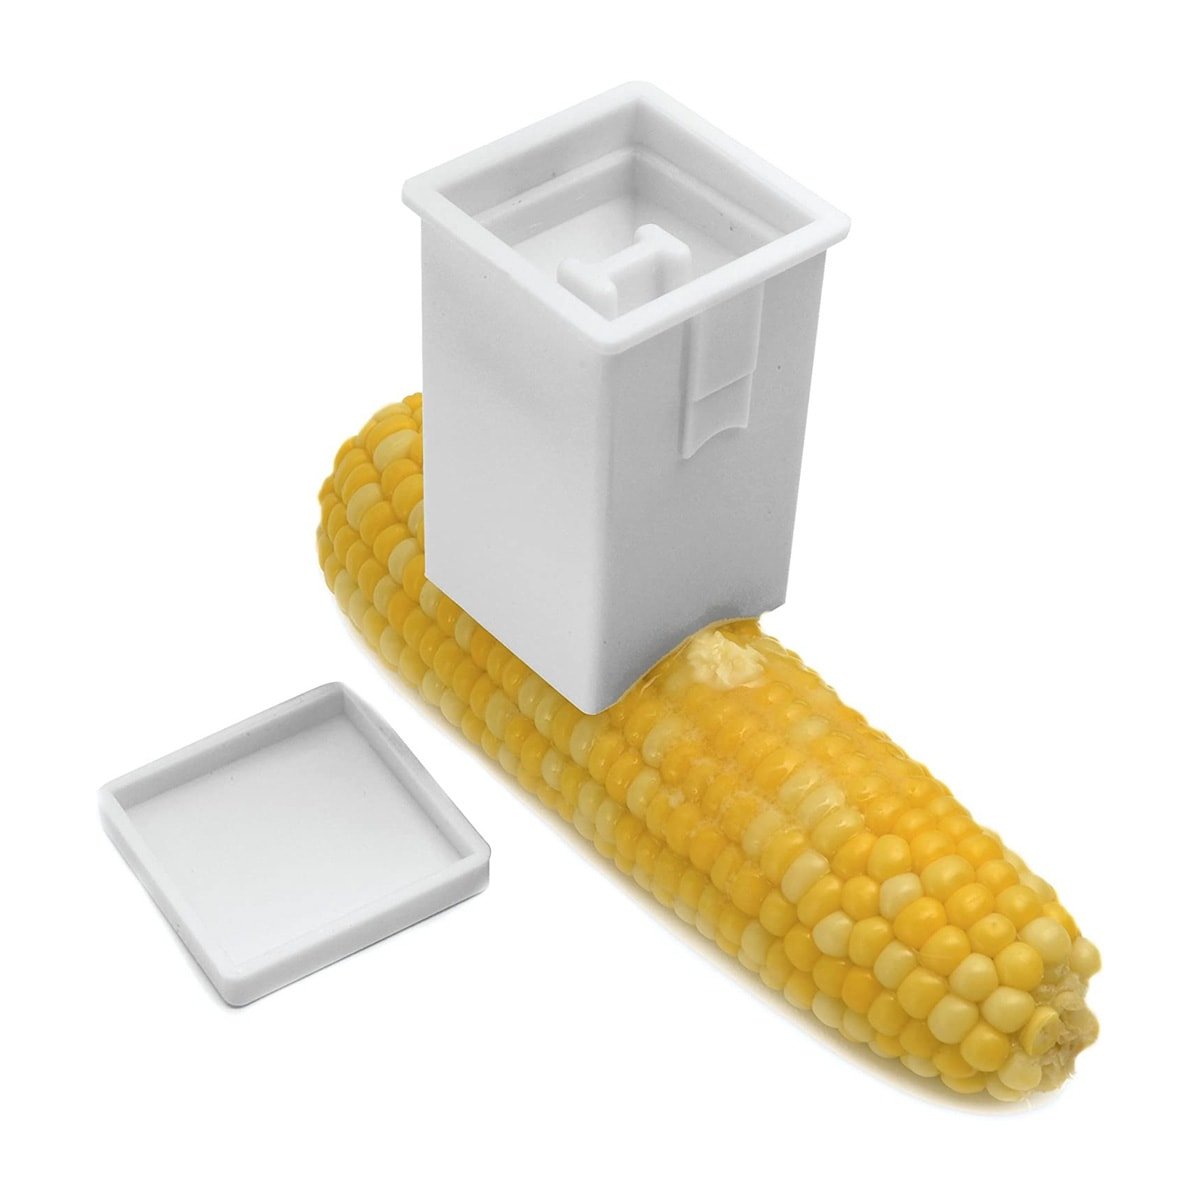 A rectangular white tool with an arched edge buttering a piece of corn on the cob.